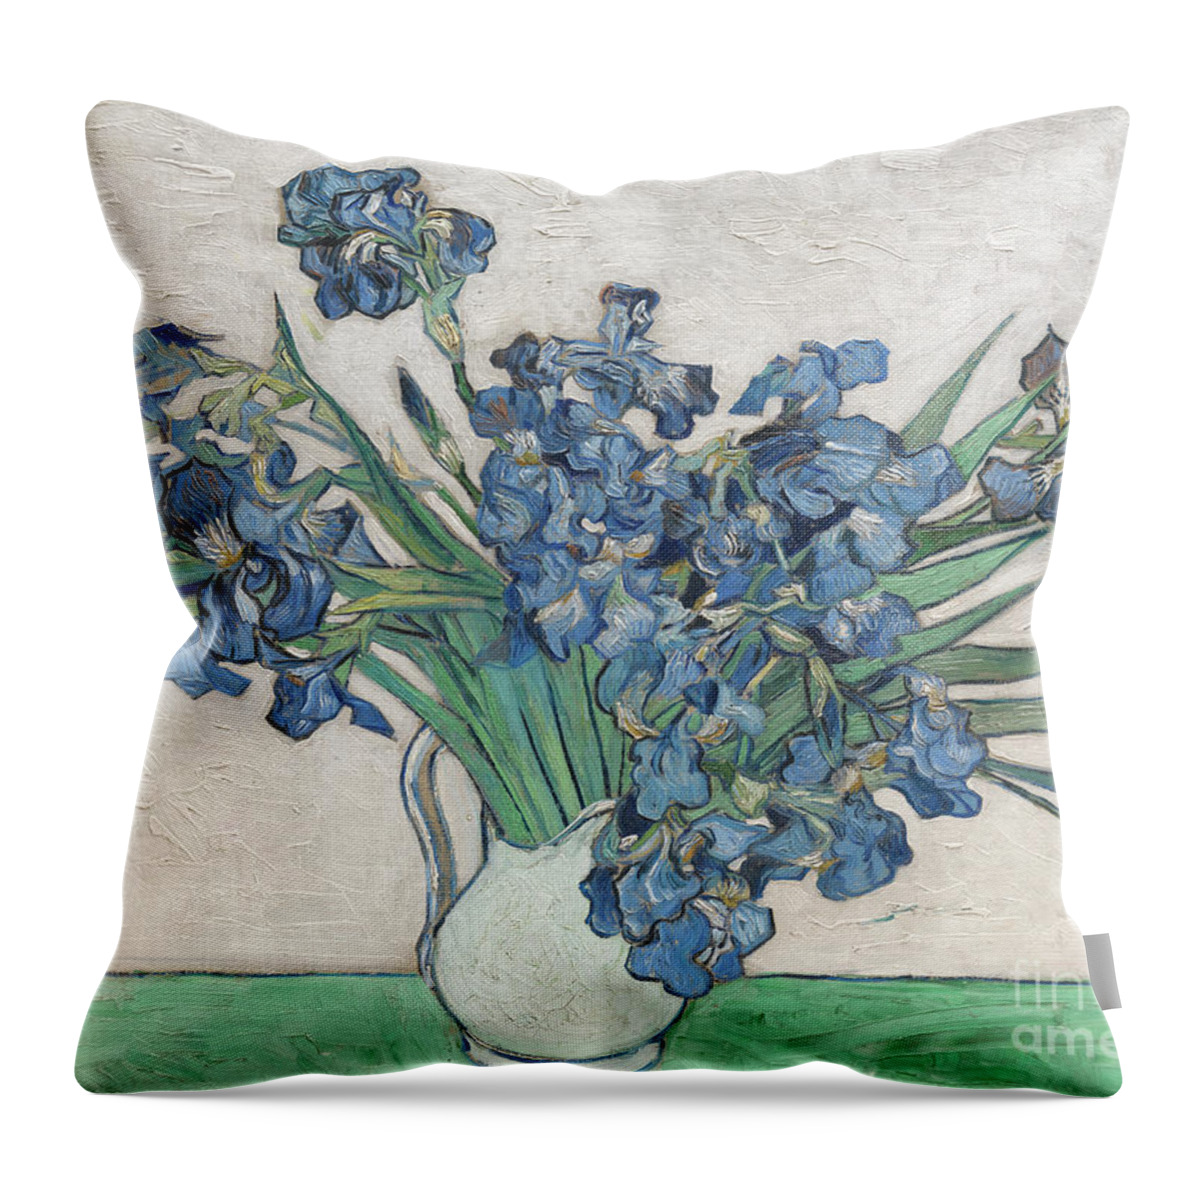 Vincent Van Gogh Throw Pillow featuring the painting Irises, 1890 by Vincent Van Gogh